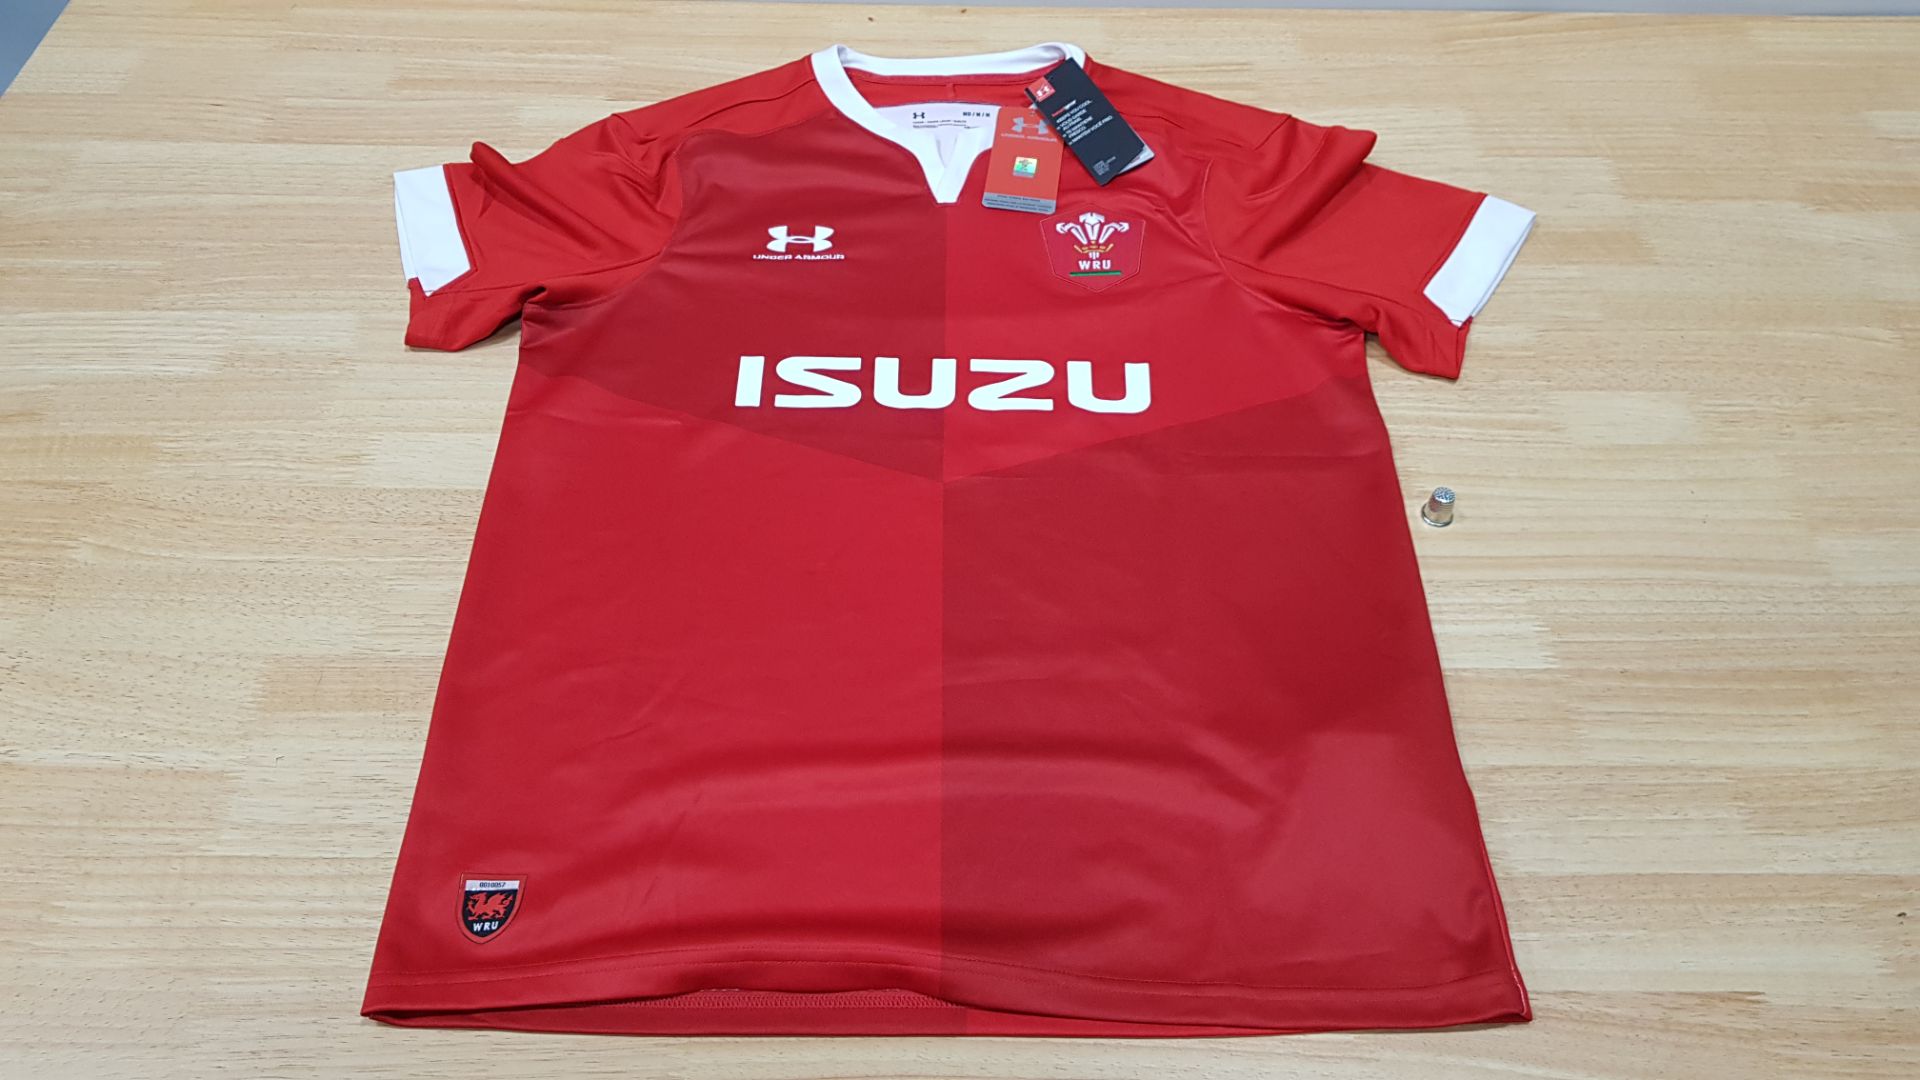 8 X BRAND NEW UNDER ARMOUR WALES RUGBY UNION OFFICIAL PRODUCT JERSEYS SIZE L